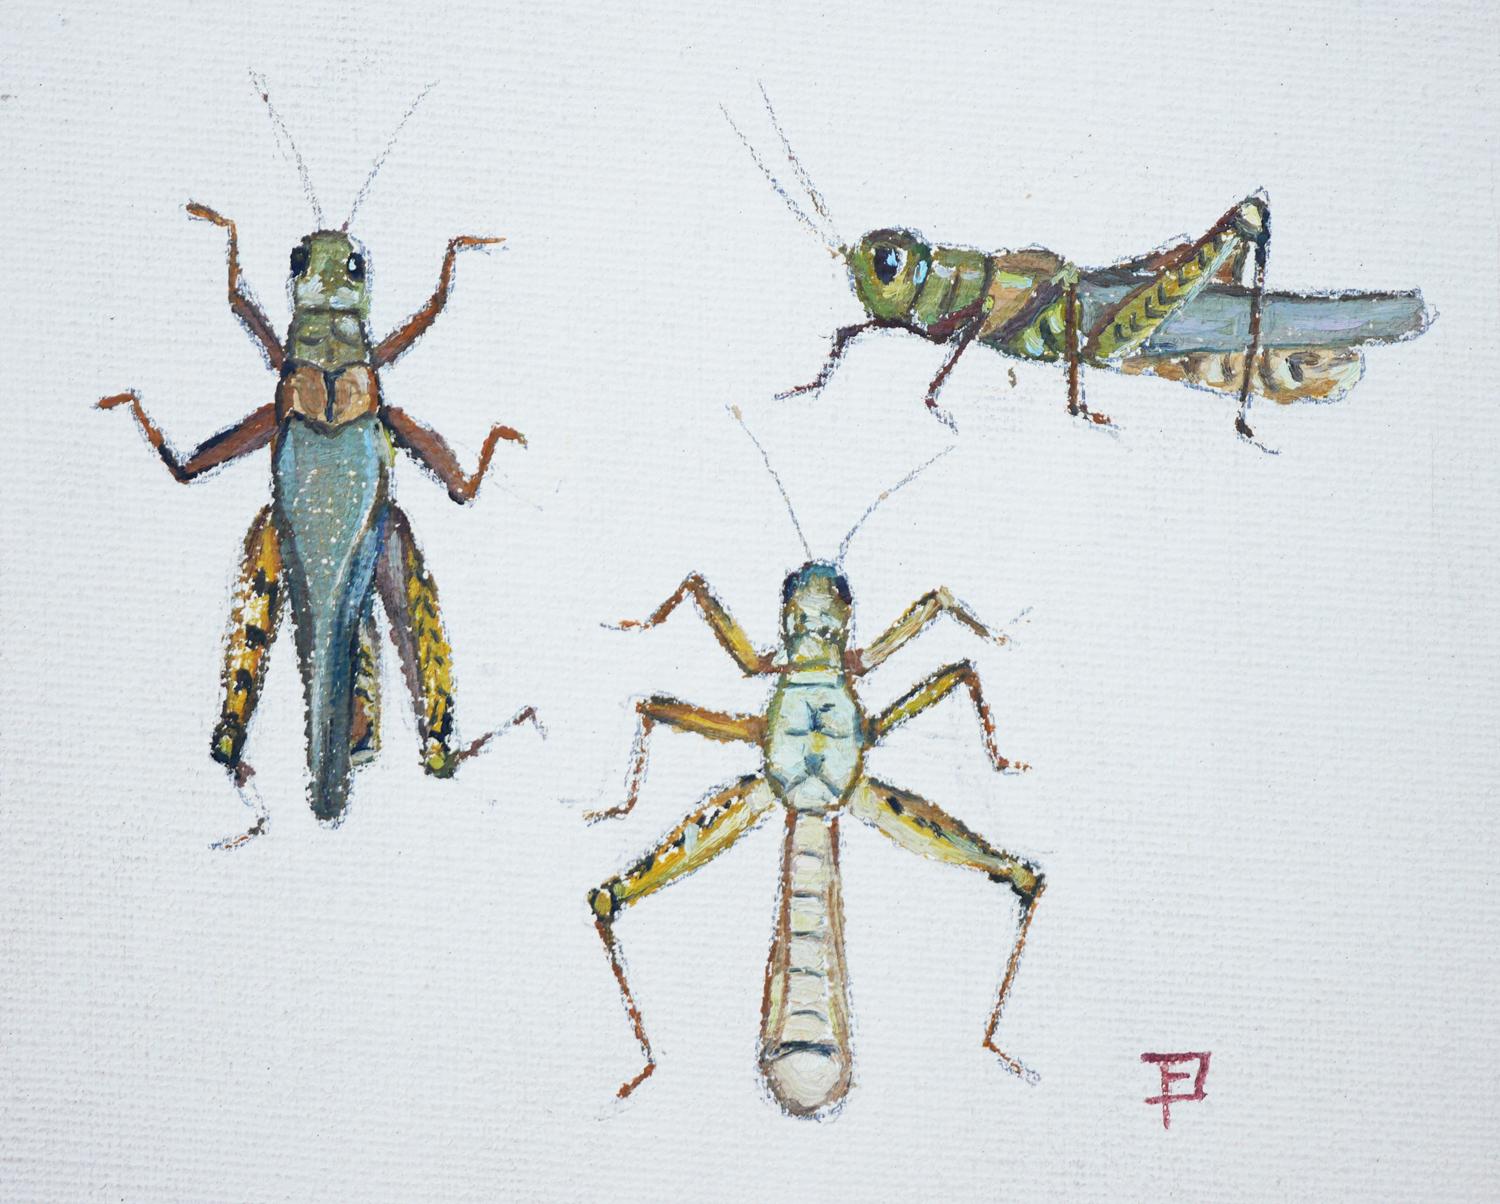  Warm-toned abstract illustrations of a study of crickets by German artist, Fred Darge. This painting depicts three varieties of crickets. Signed (monogram) by the artist at the bottom right corner. Unframed but framing options are